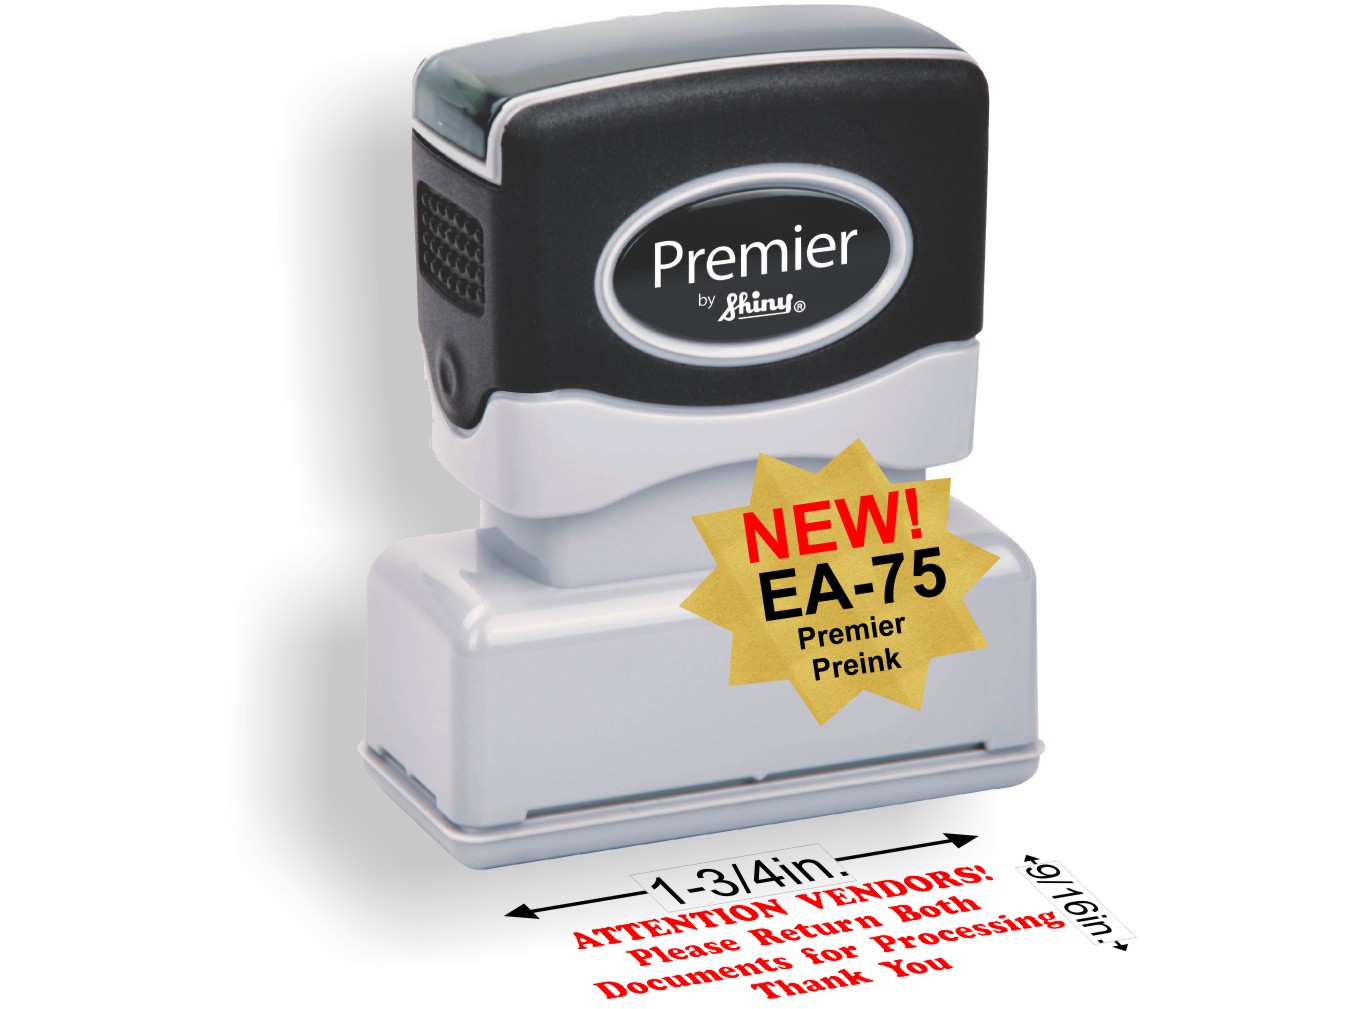 EA-75 Premier preinked stamp from Shiny